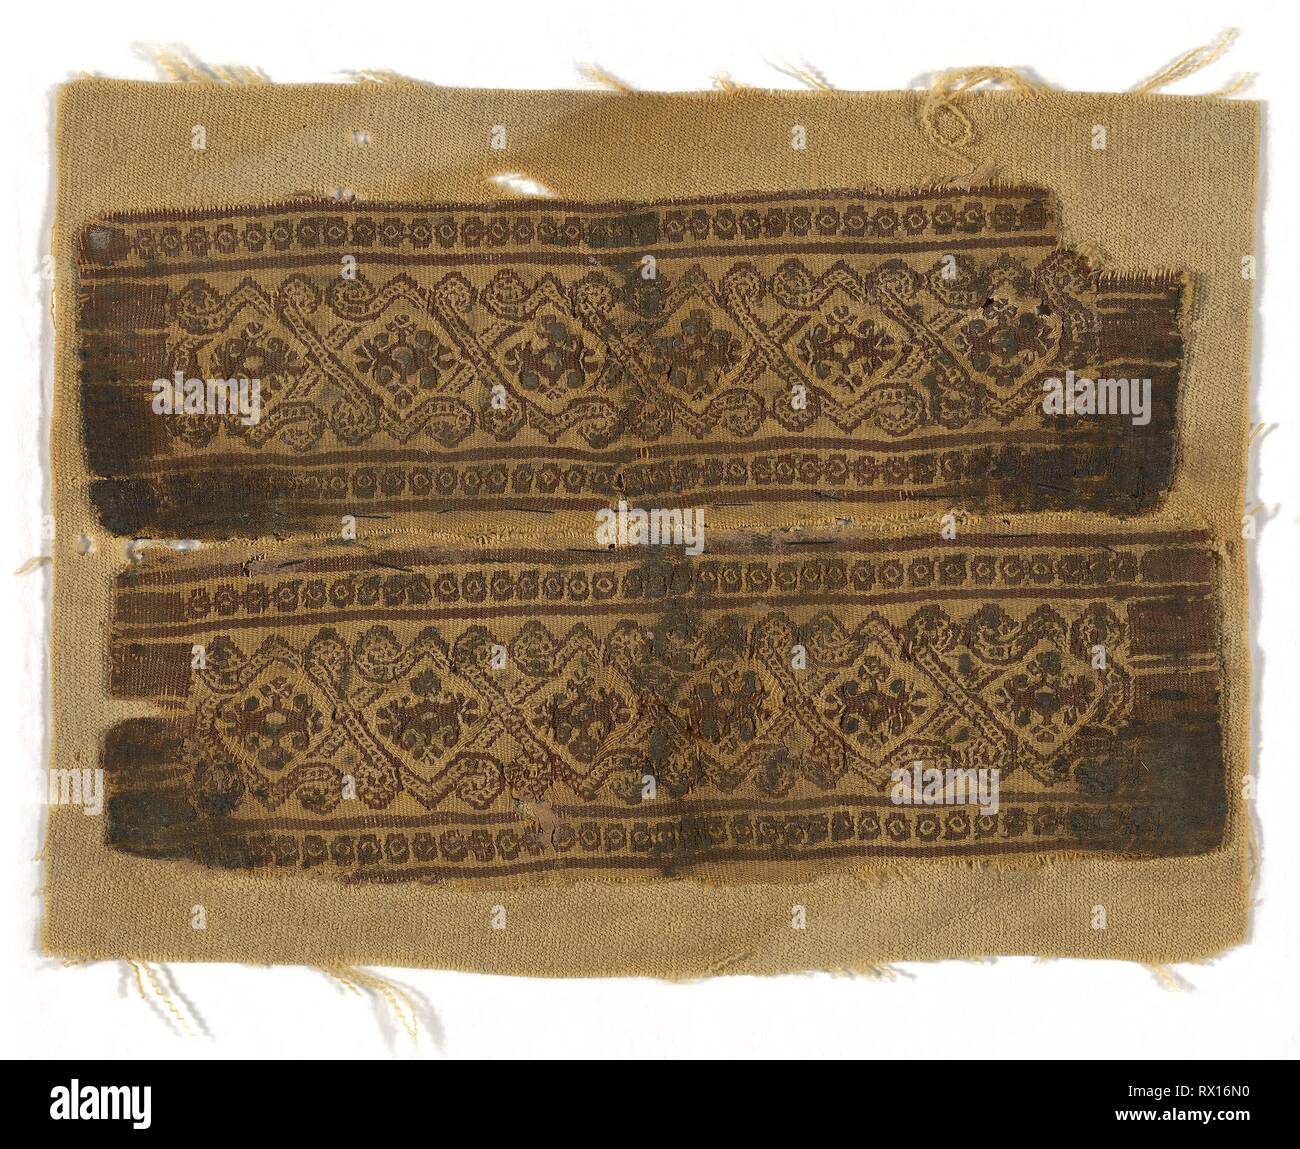 Pair of Cuff Bands. Coptic; Egypt. Date: 201 AD-500 AD. Dimensions: 7 × 23 cm (2 3/4 × 9 in.)  7.5 × 23.3 cm (3 × 9 1/8 in.). Wool, tapestry weave. Origin: Egypt. Museum: The Chicago Art Institute. Stock Photo